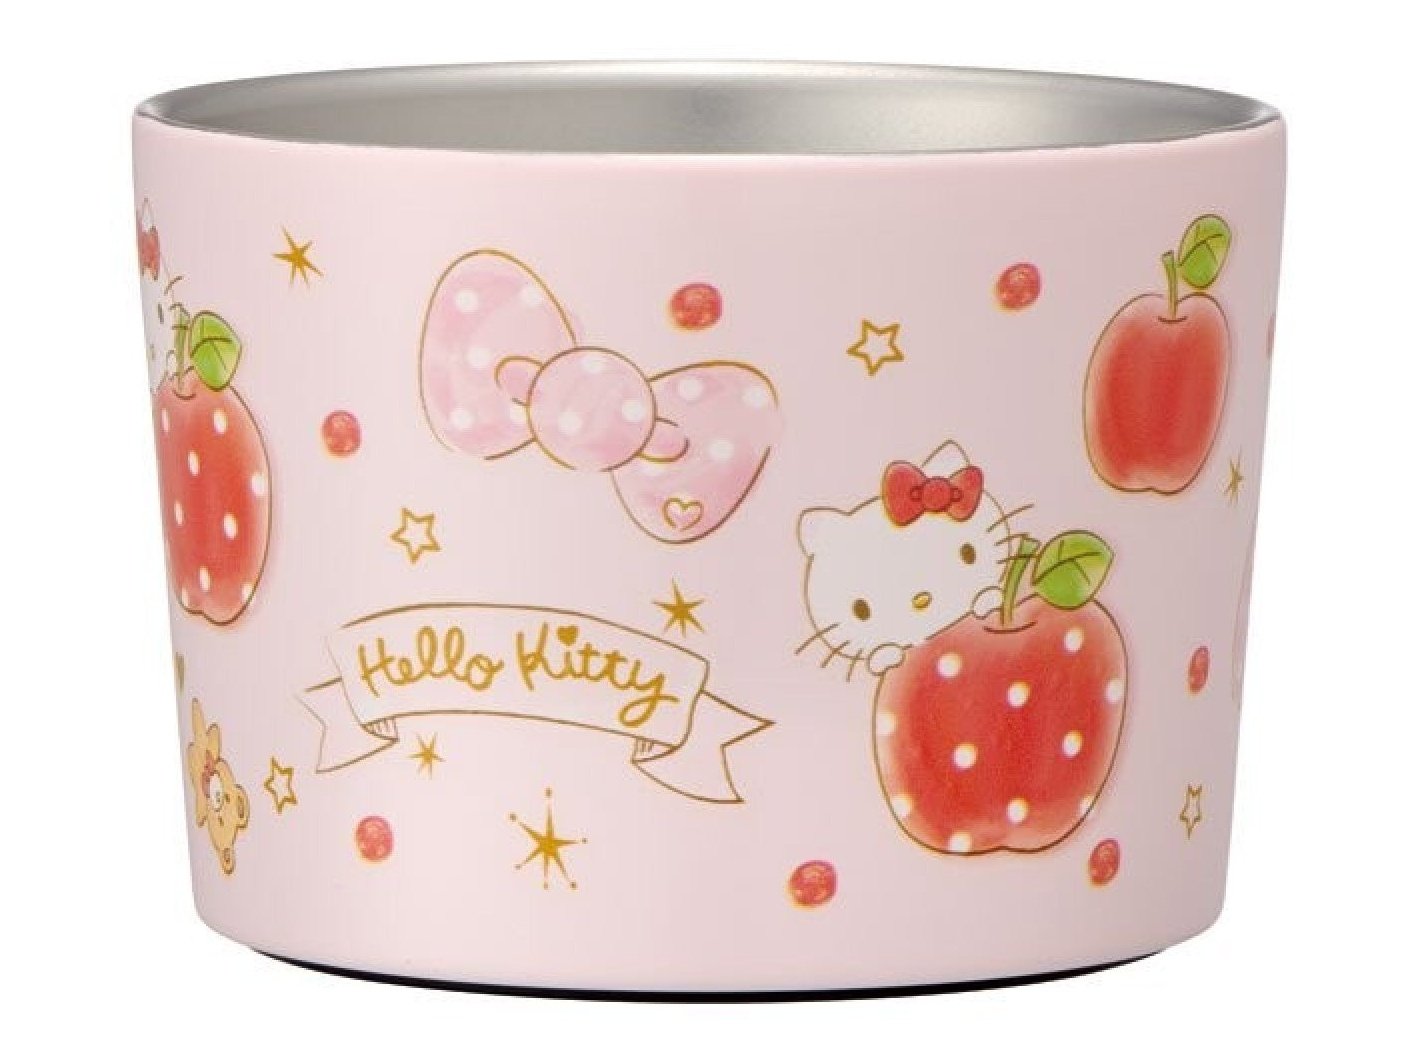 Skater Hello Kitty Happiness Vacuum Stainless Ice-cream Cup